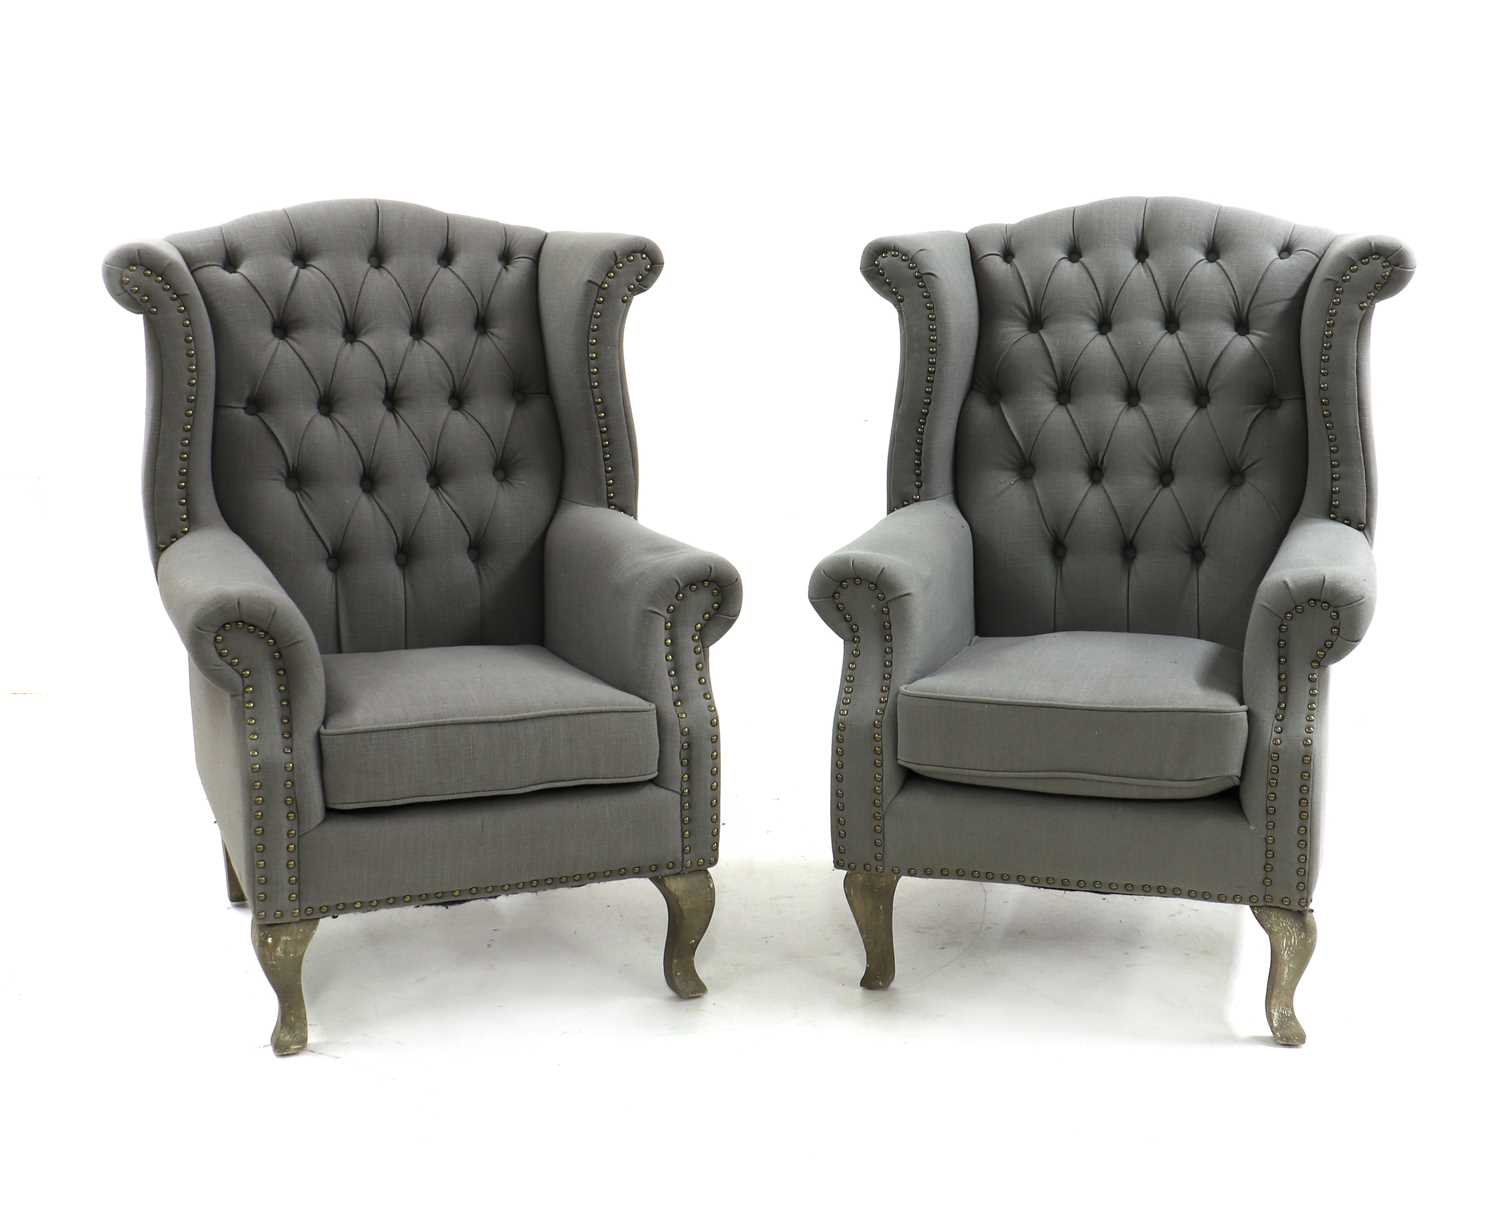 A pair of Queen Anne style wingback chairs,